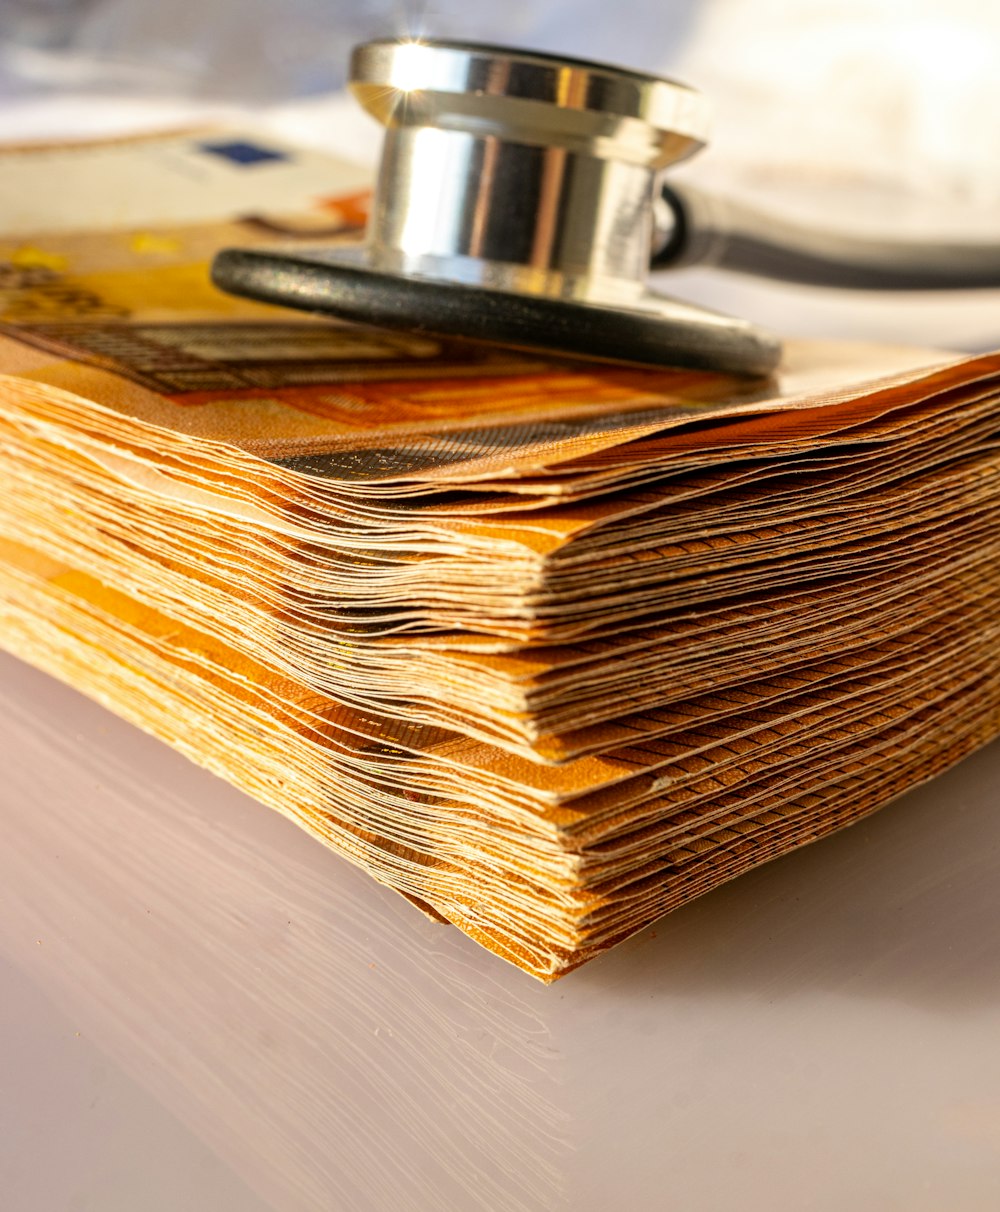 a stack of paper with a stethoscope on top of it